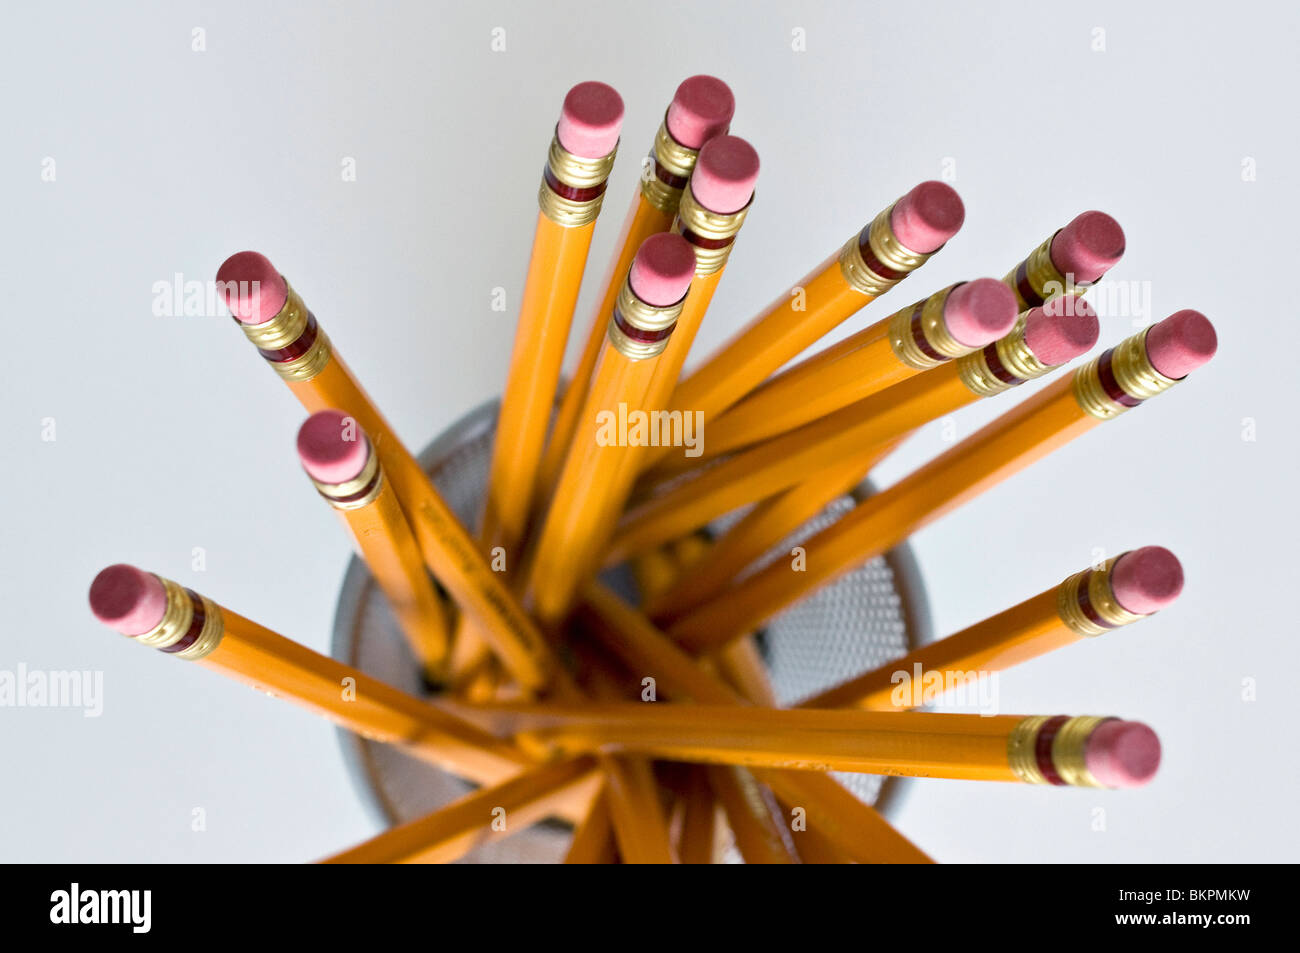 Numerous orange HB lead pencils in holder, on white background. Stock Photo